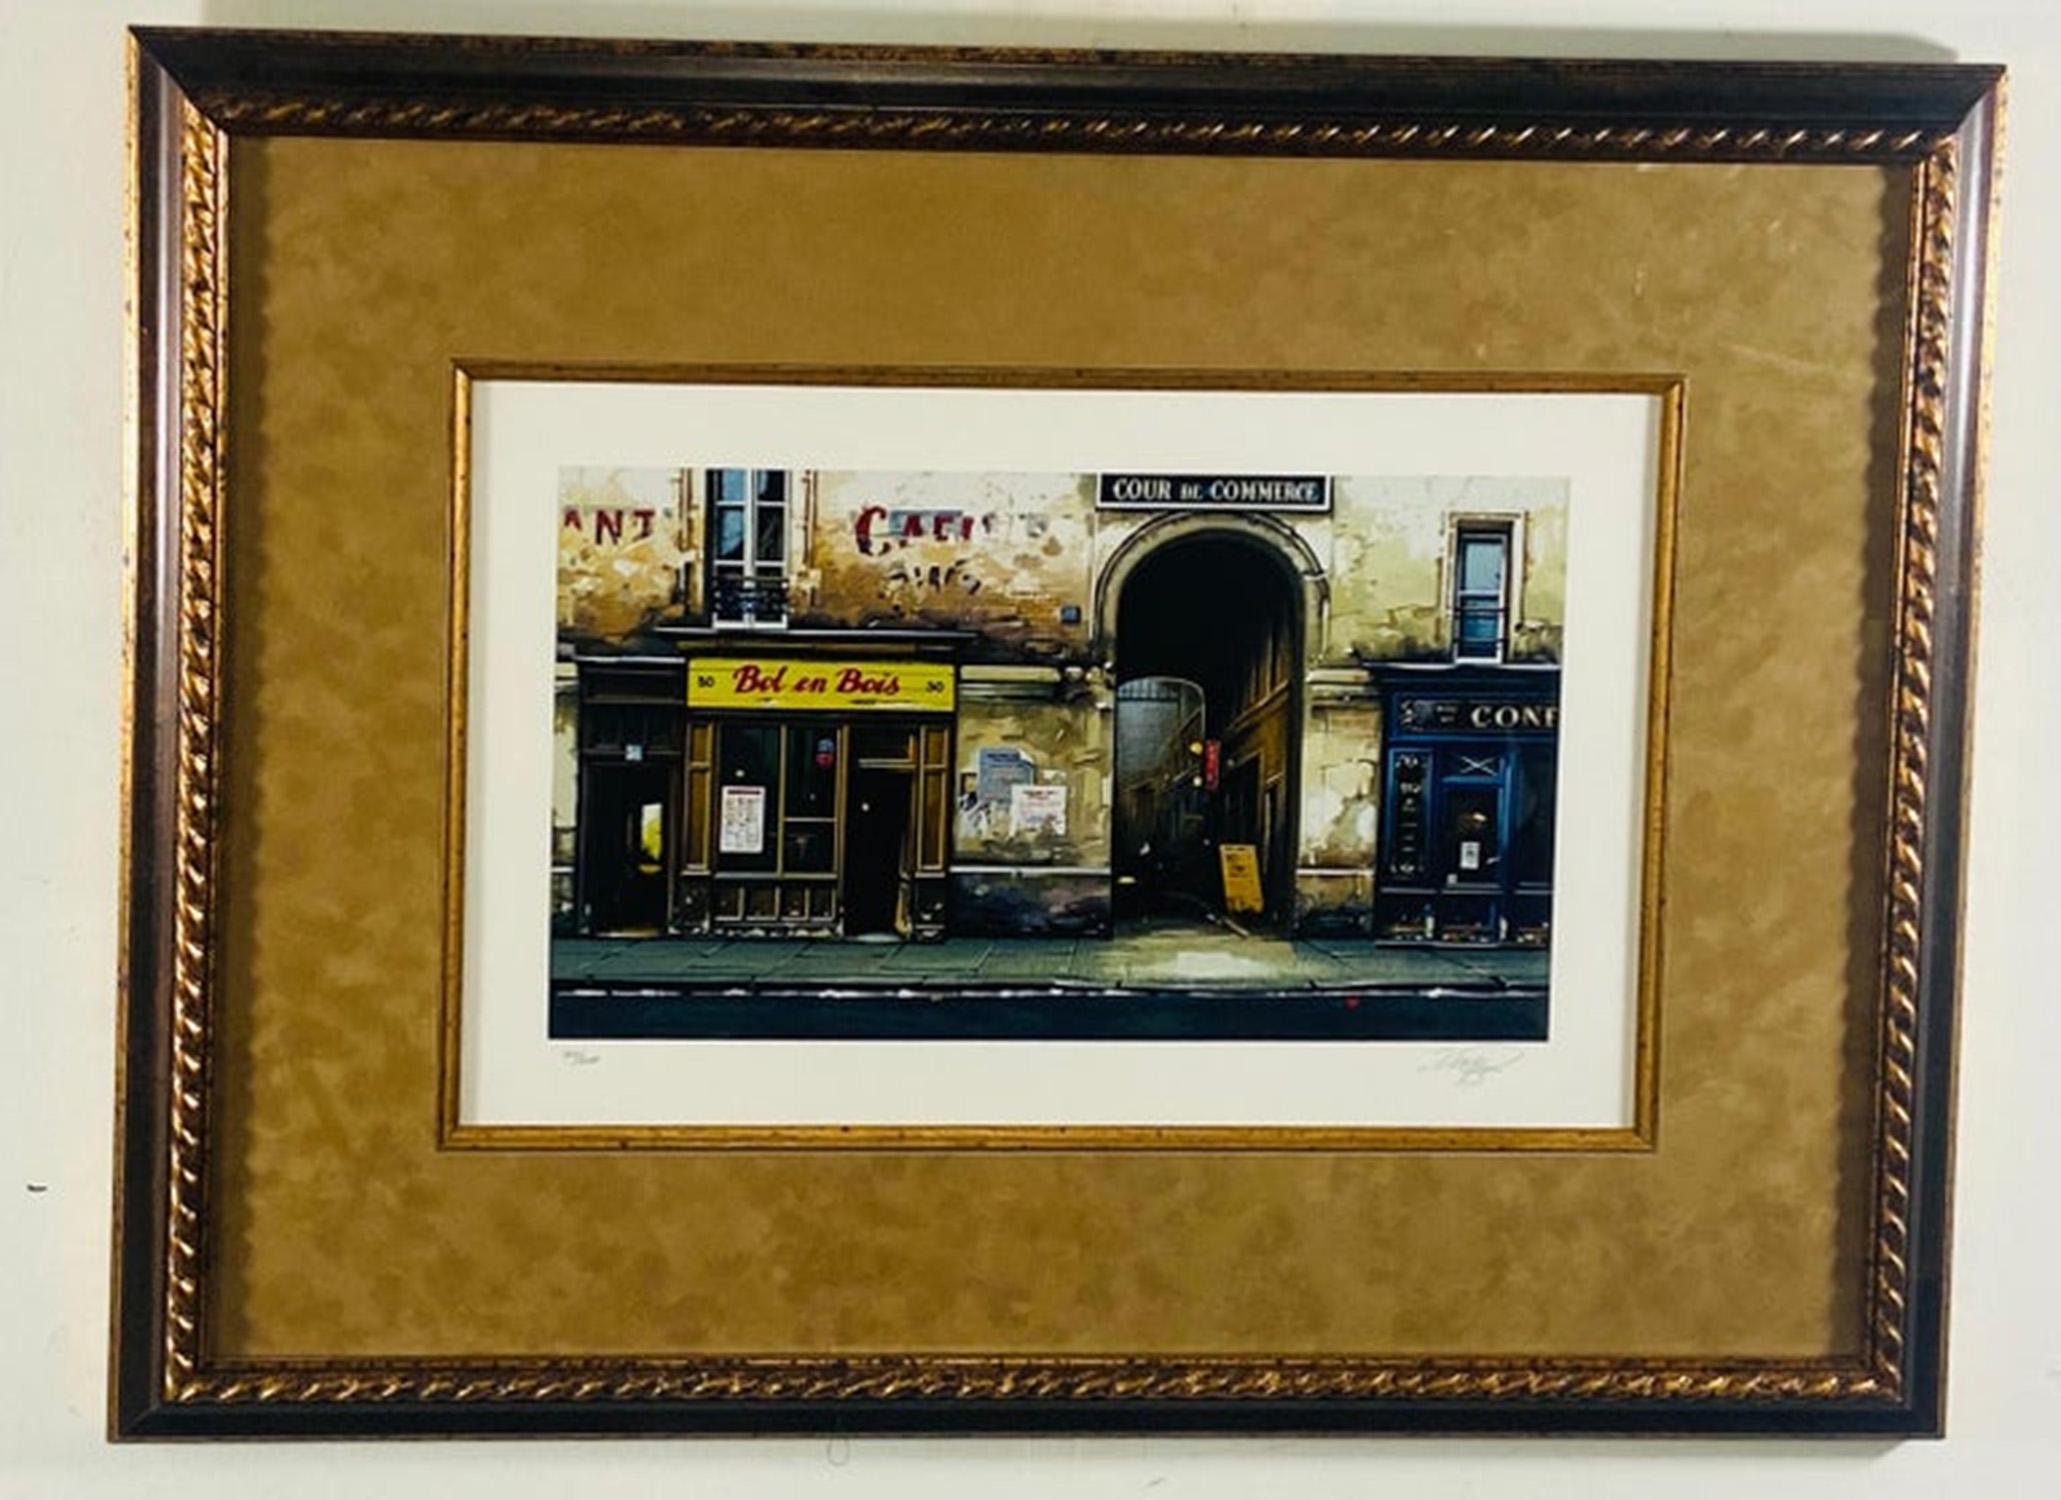 A set of three beautiful framed and matted prints depicting scenes of the street of Paris. Full of life and creativity, the streets of the city of lights seduce us with its artisan shops and colorful business signs and glamorous cafes and bistros.